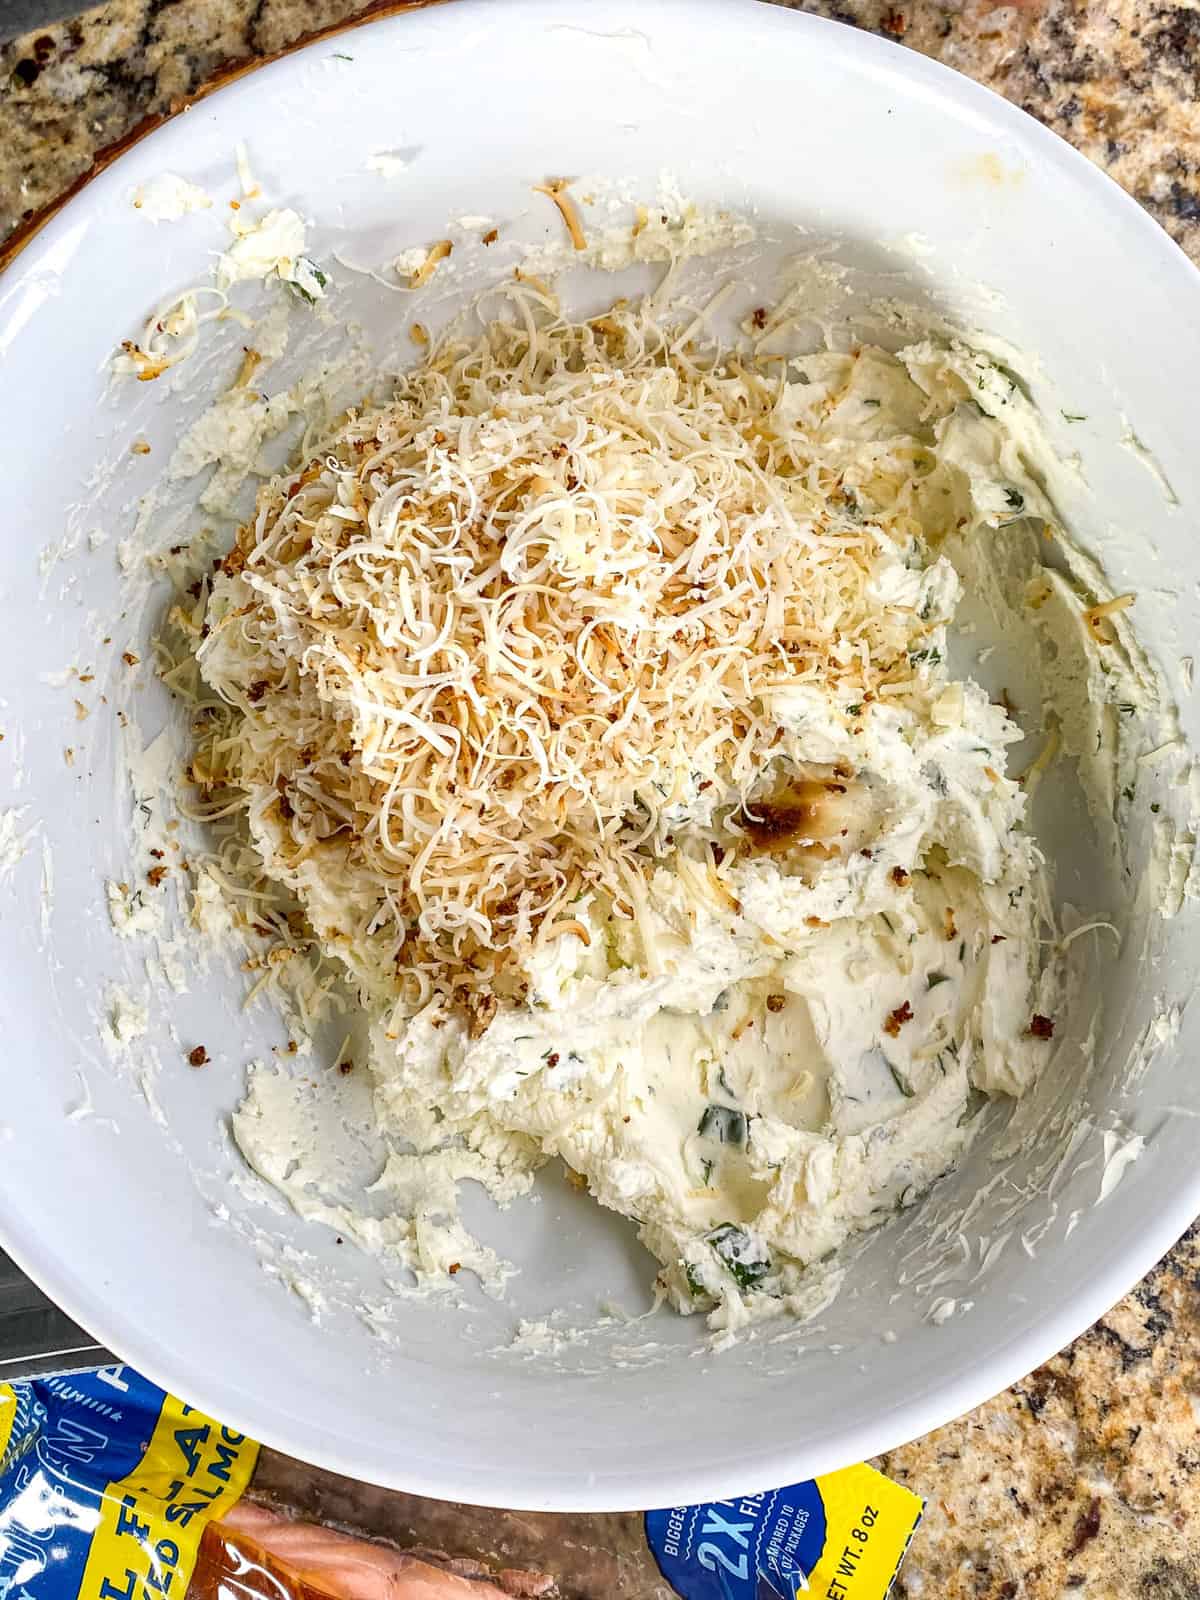 Shredded cheddar cheese added to a bowl of blended mascarpone cheese, green onions and dill.